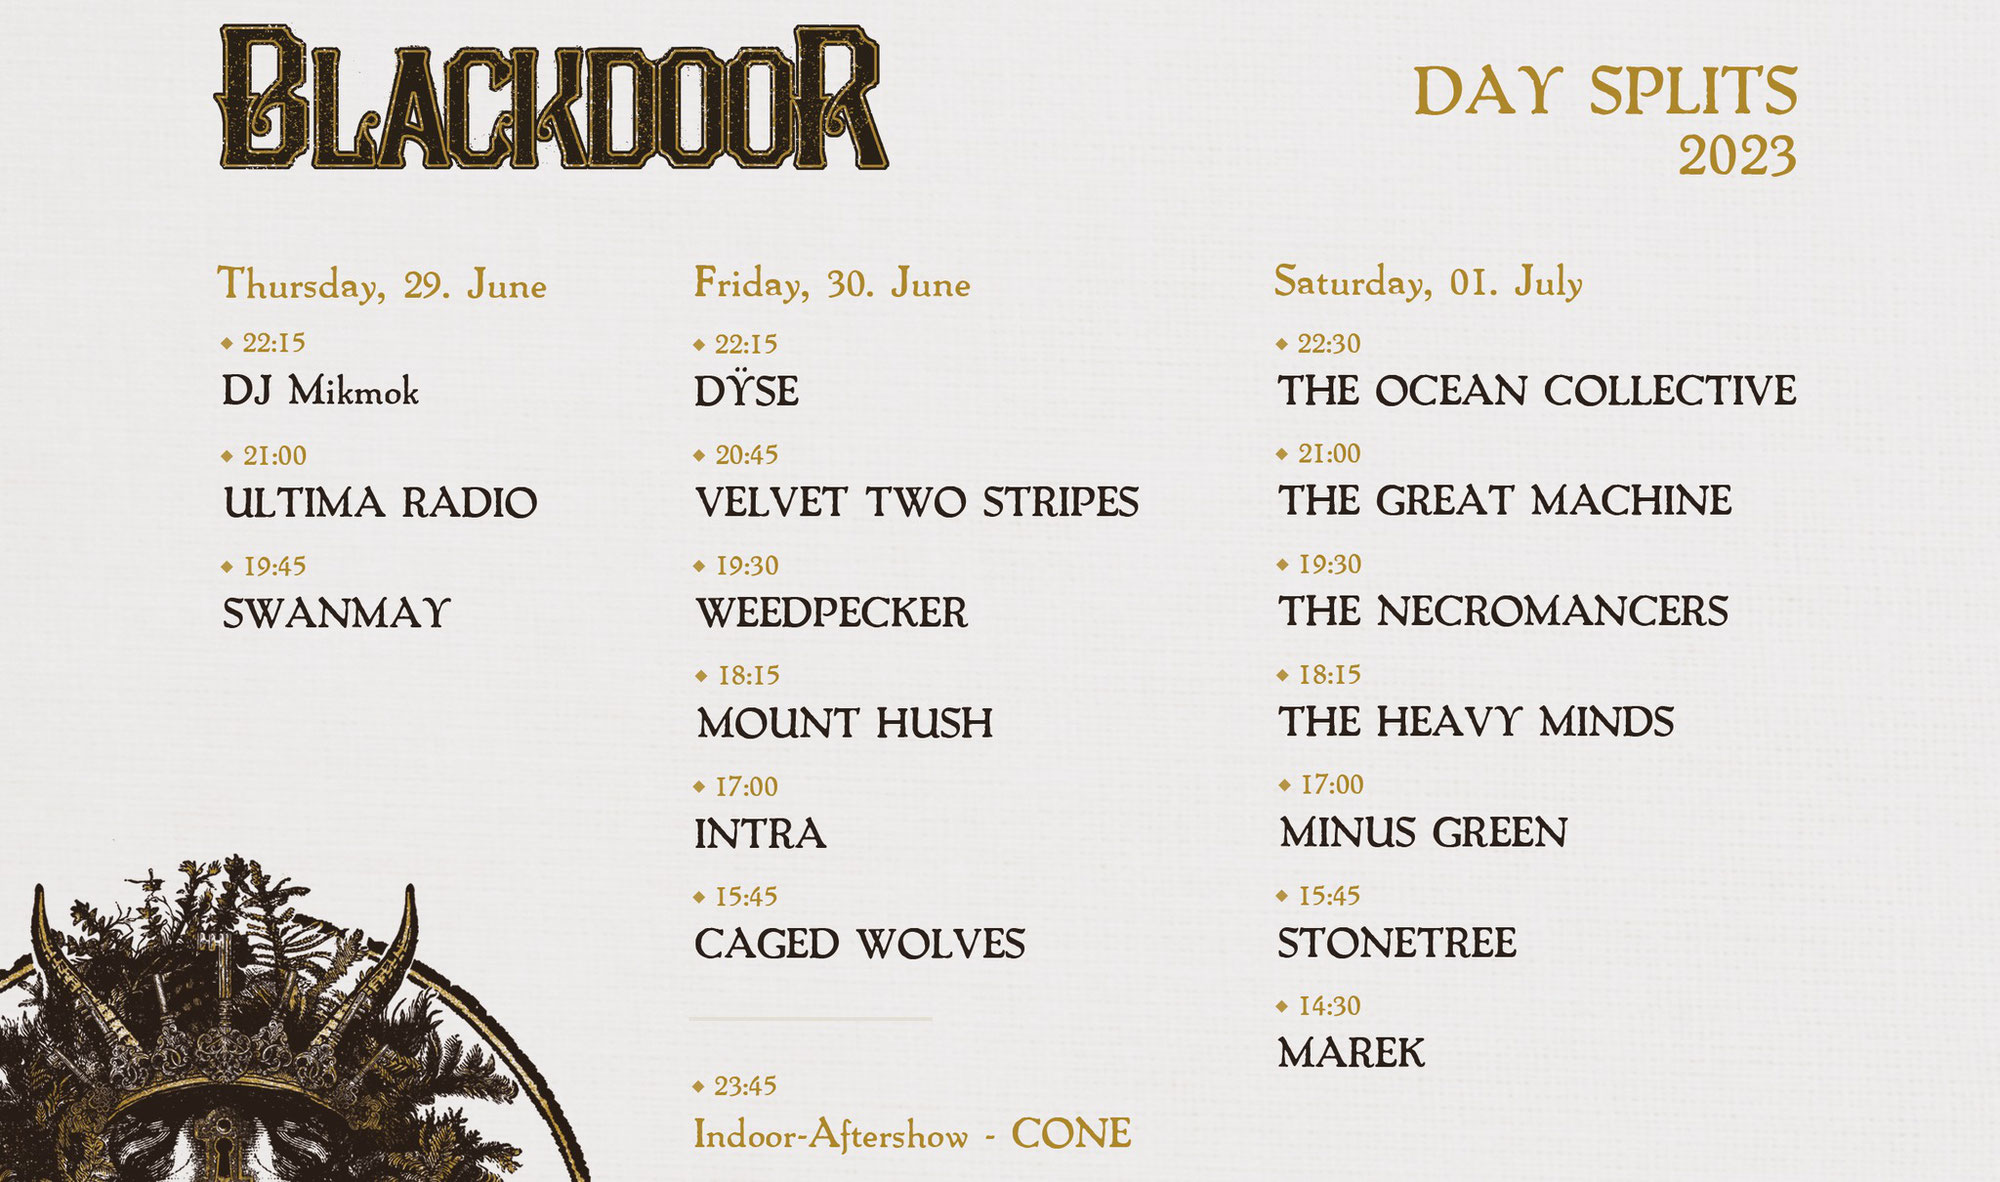 Final Countdown for the Blackdoor Music Fest